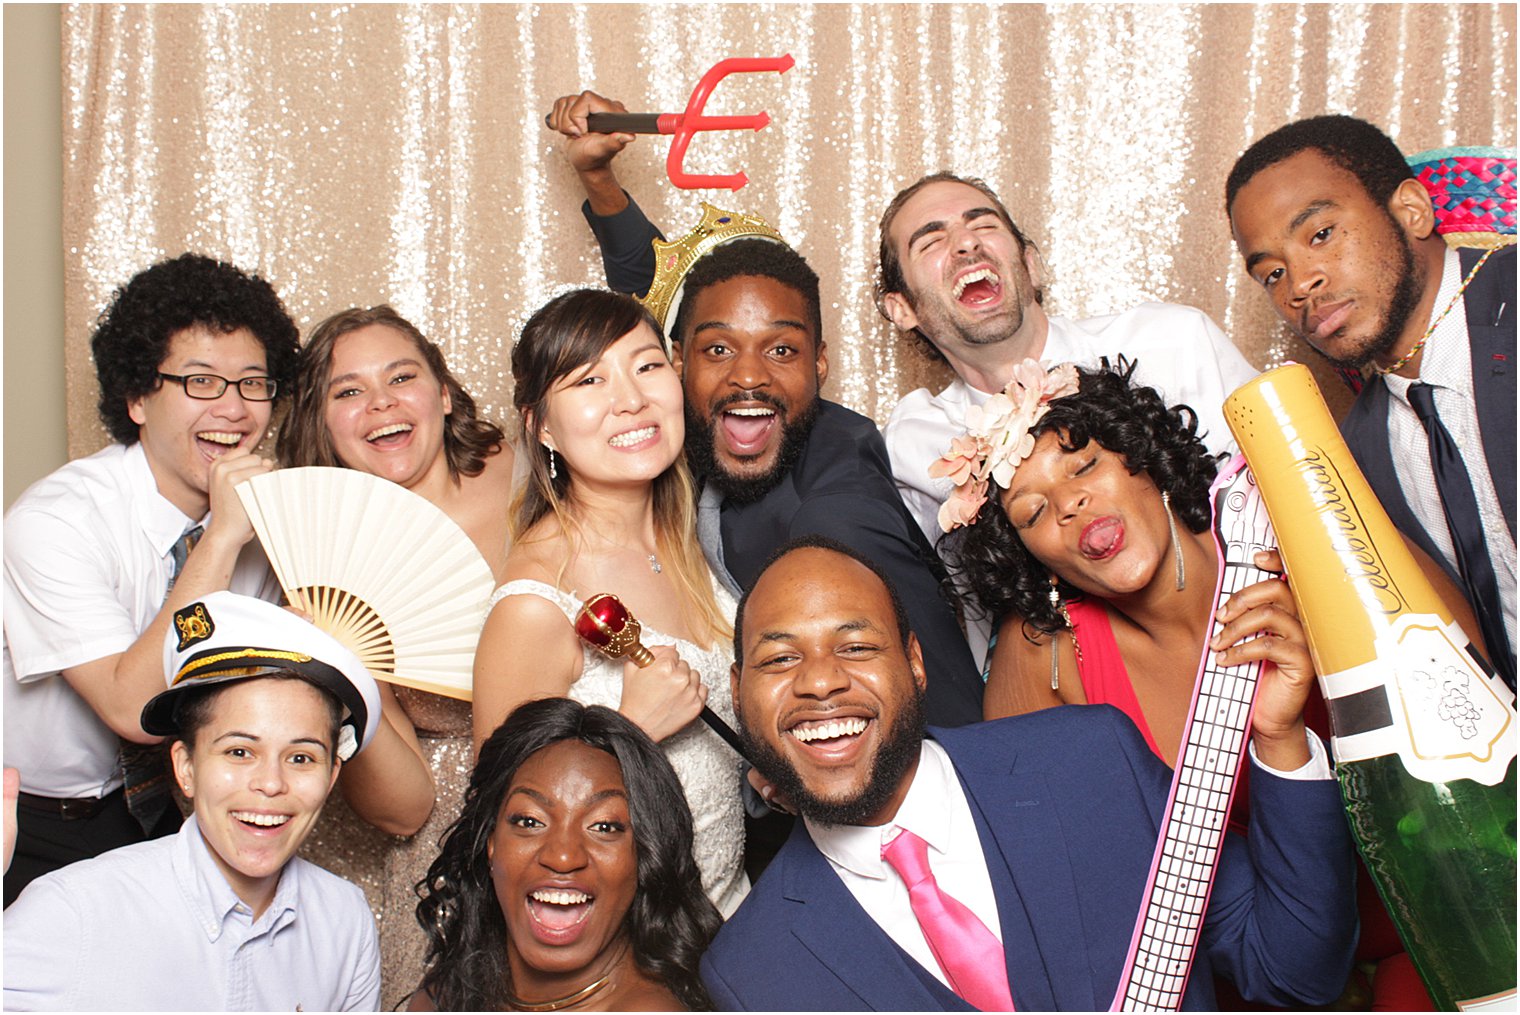 Lake Mohawk Country Club photo booth fun in New Jersey